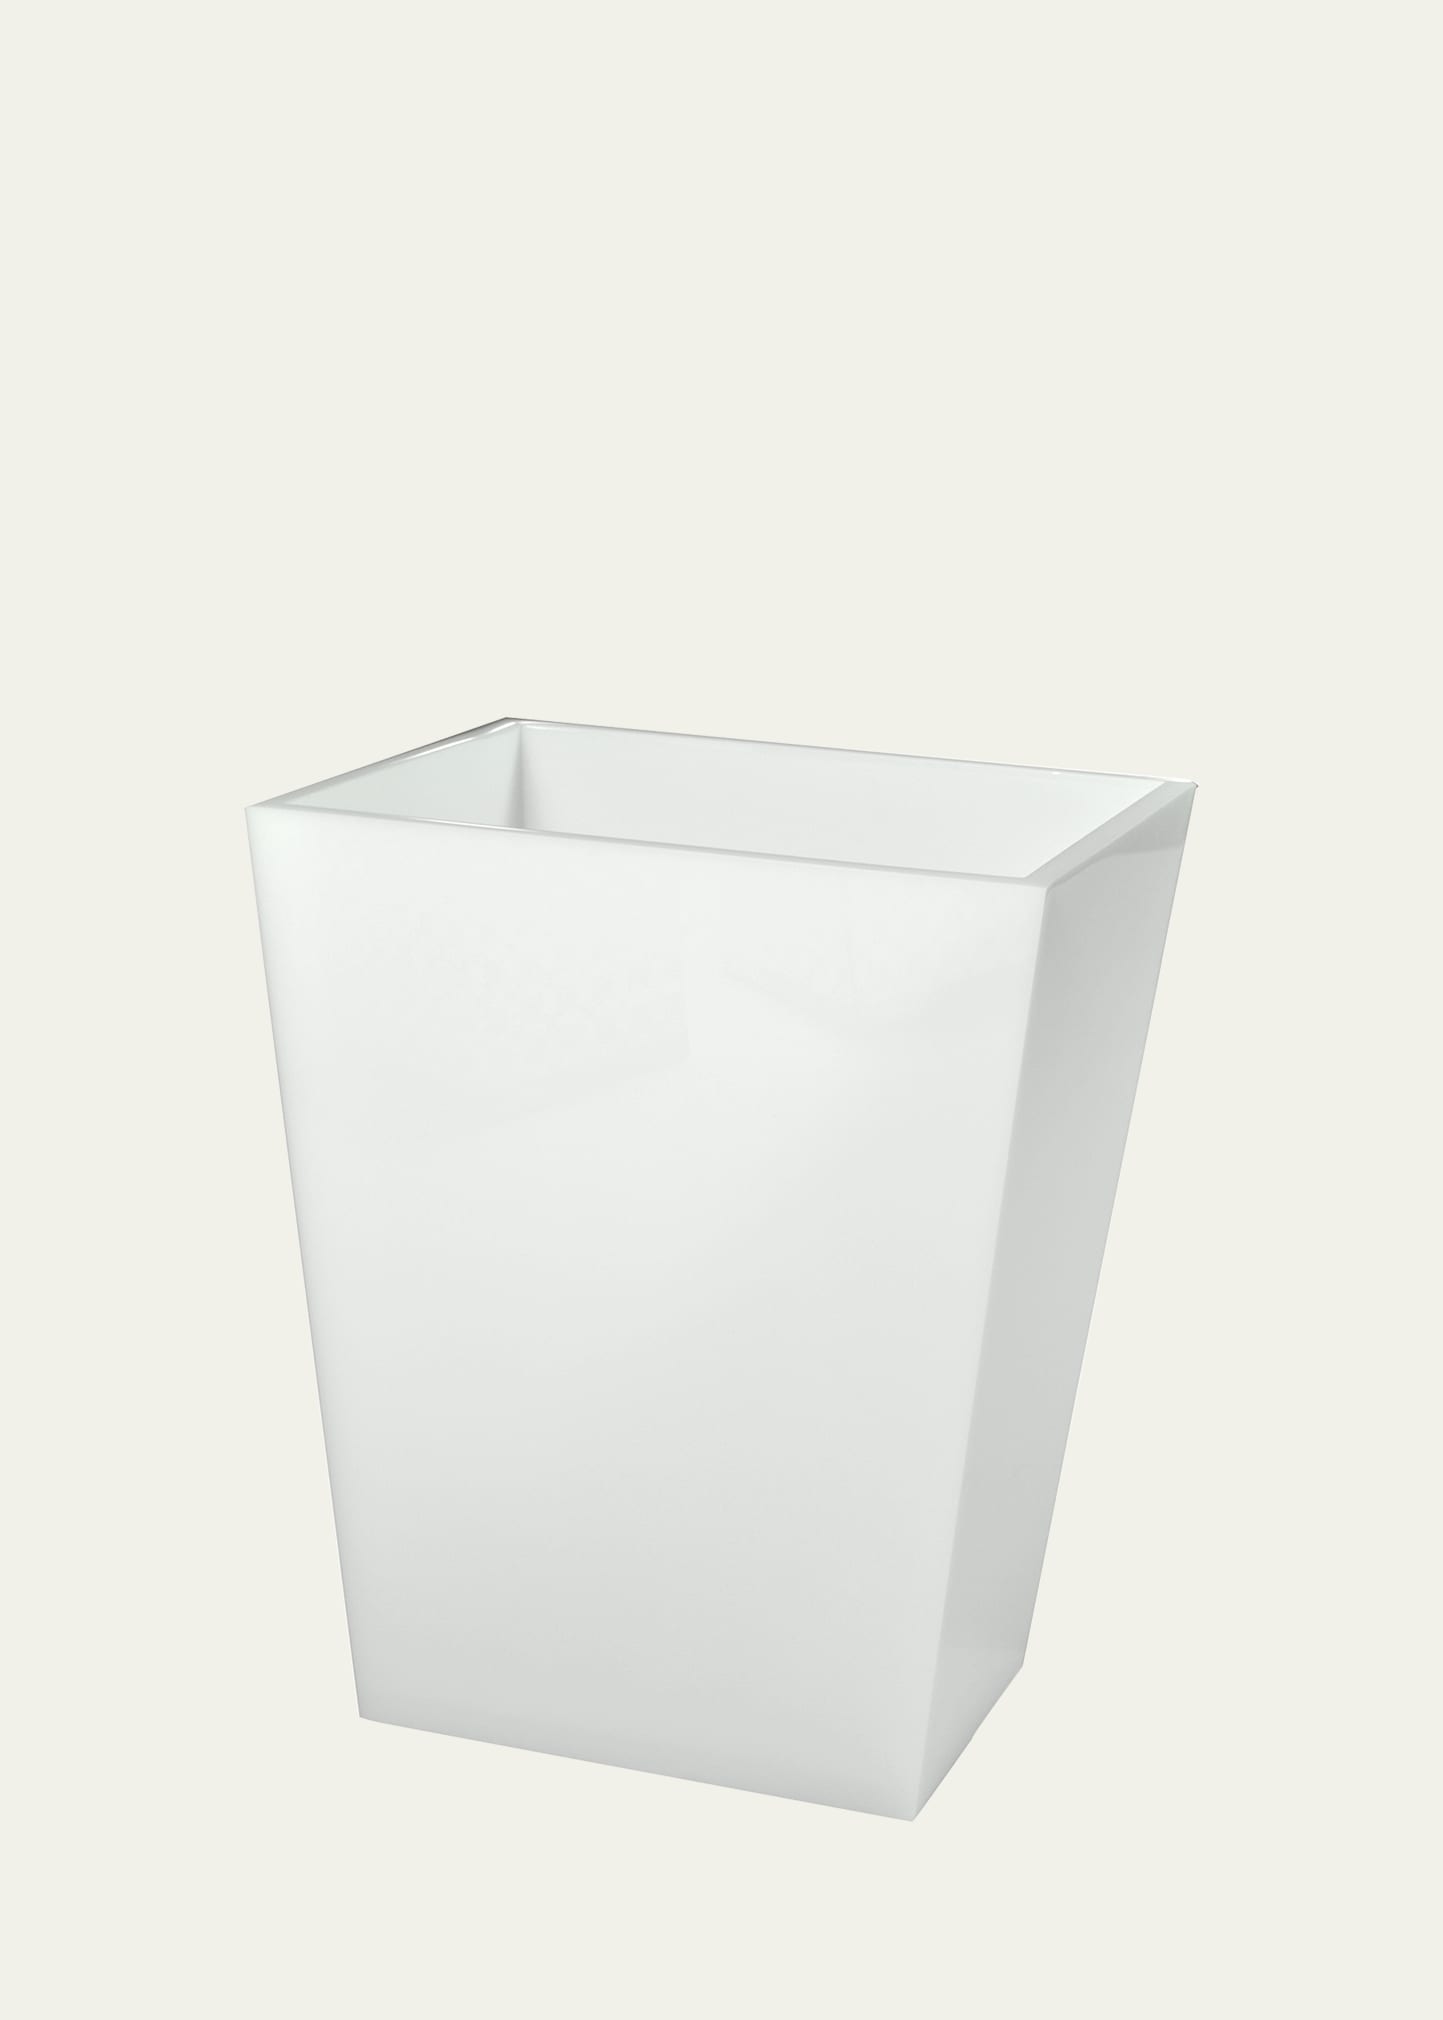 Mike & Ally Ice Wastebasket In White